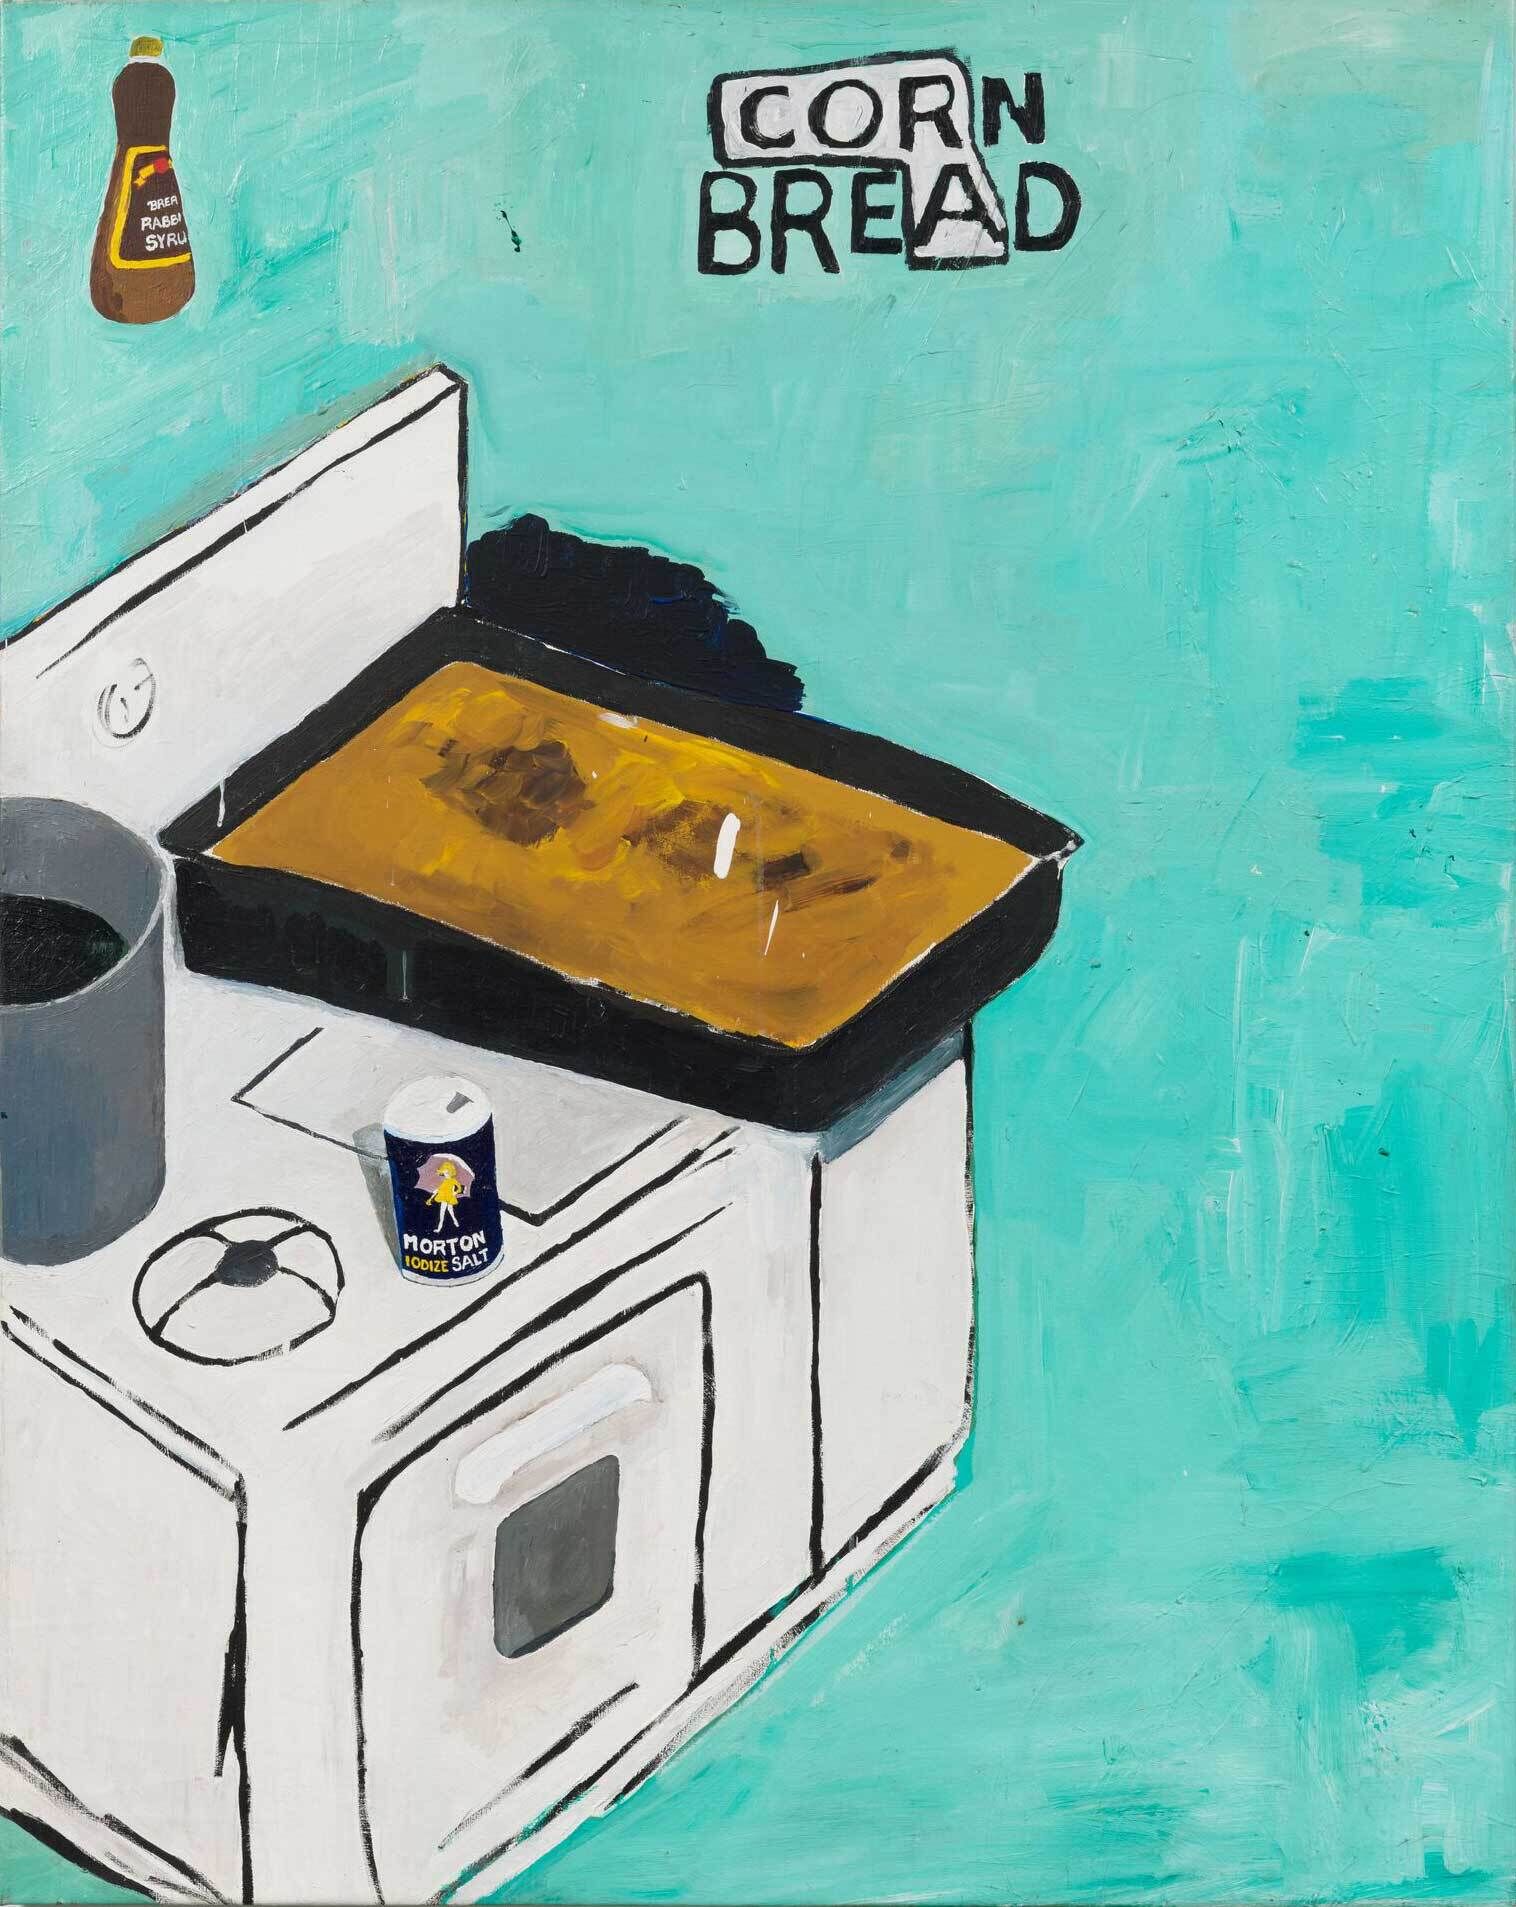 Against an aqua background, a white oven sits in bottom left of the painting. Resting on the stovetop is a rectangular pan of cornbread, a metal pot, and a tube of Morton’s Sea Salt. In the upper left corner is a bottle of golden colored syrup. The words “CORN BREAD” are written in black letters to the right of the syrup. The letters “CORA” are highlighted by a white L-shaped box with a black outline.